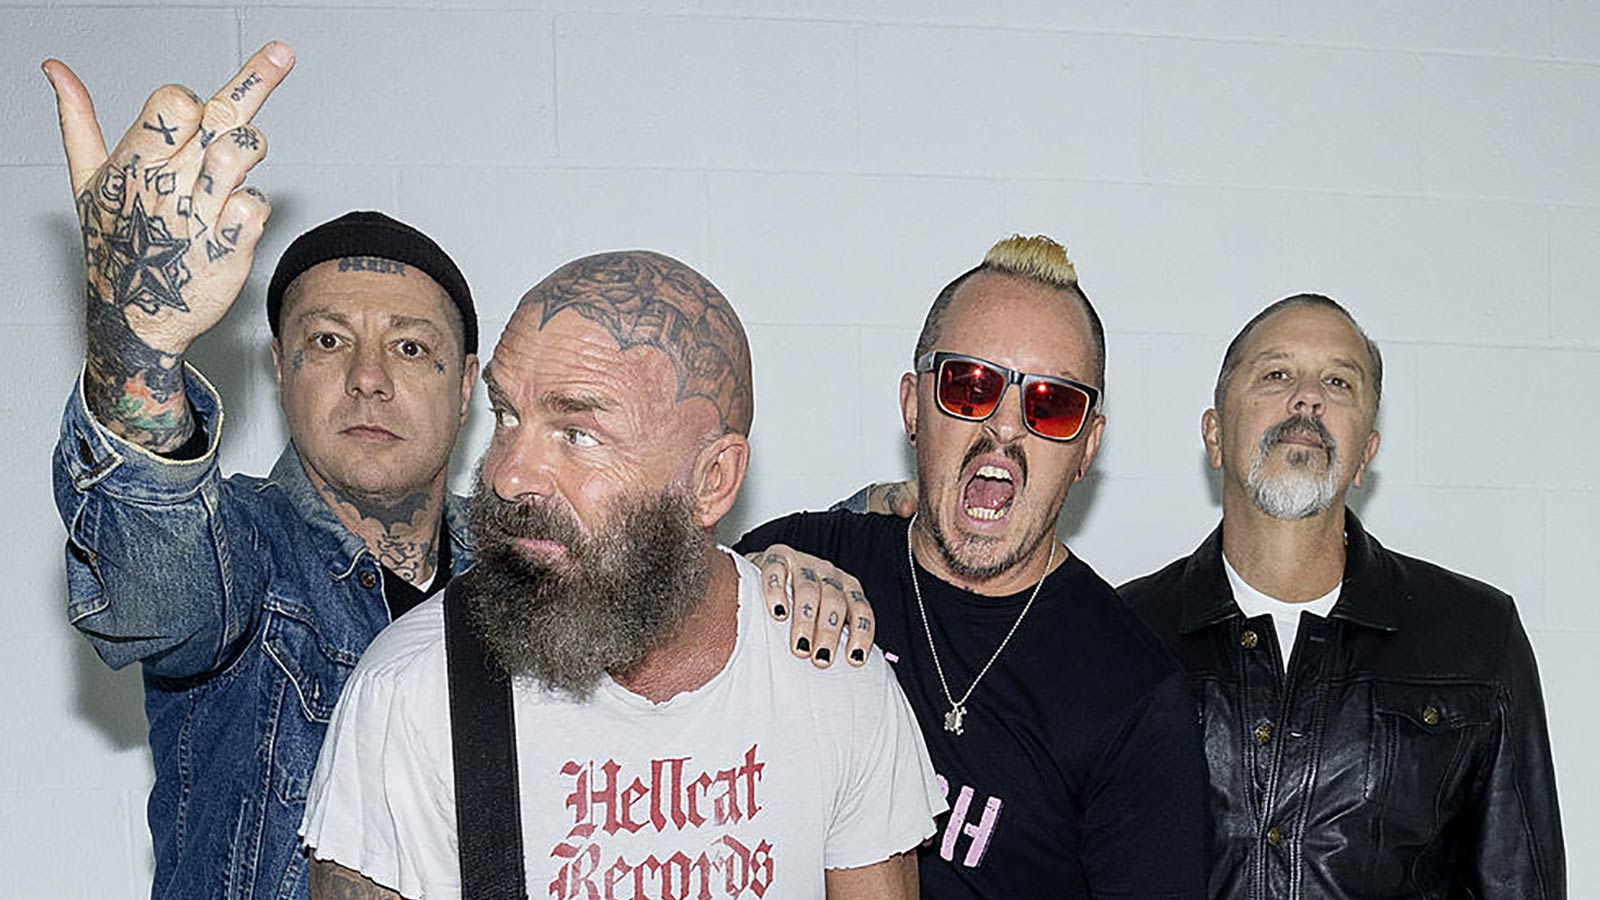 RANCID announce first album in 6 years Hear blistering title track